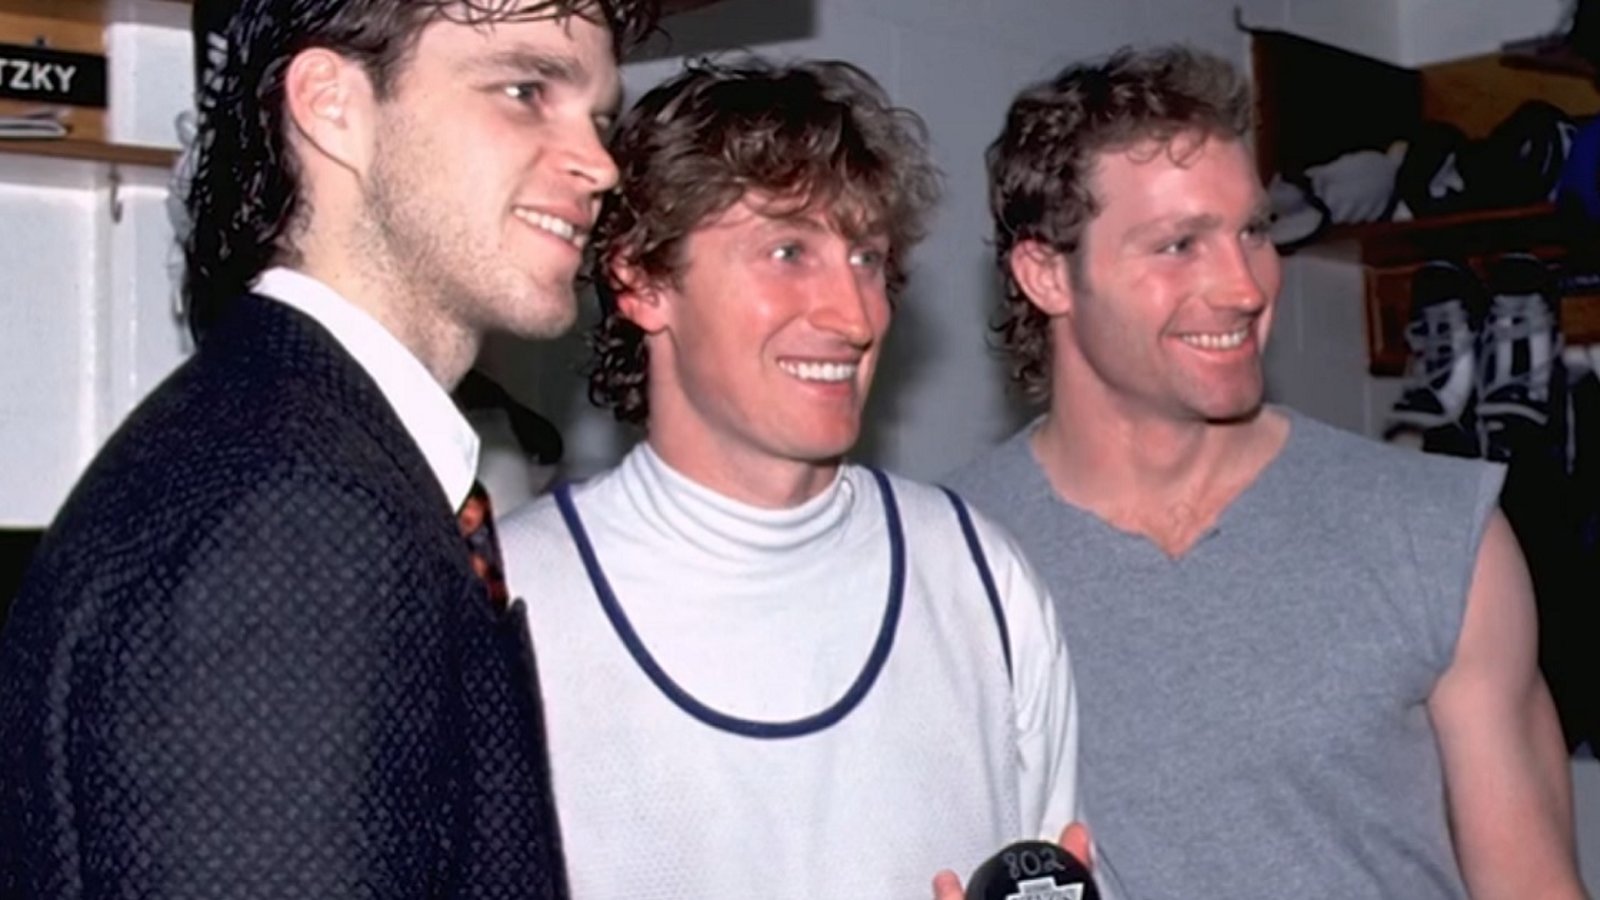  Throwback: Wayne Gretzky passes Gordie Howe's record for goals scored in the NHL.